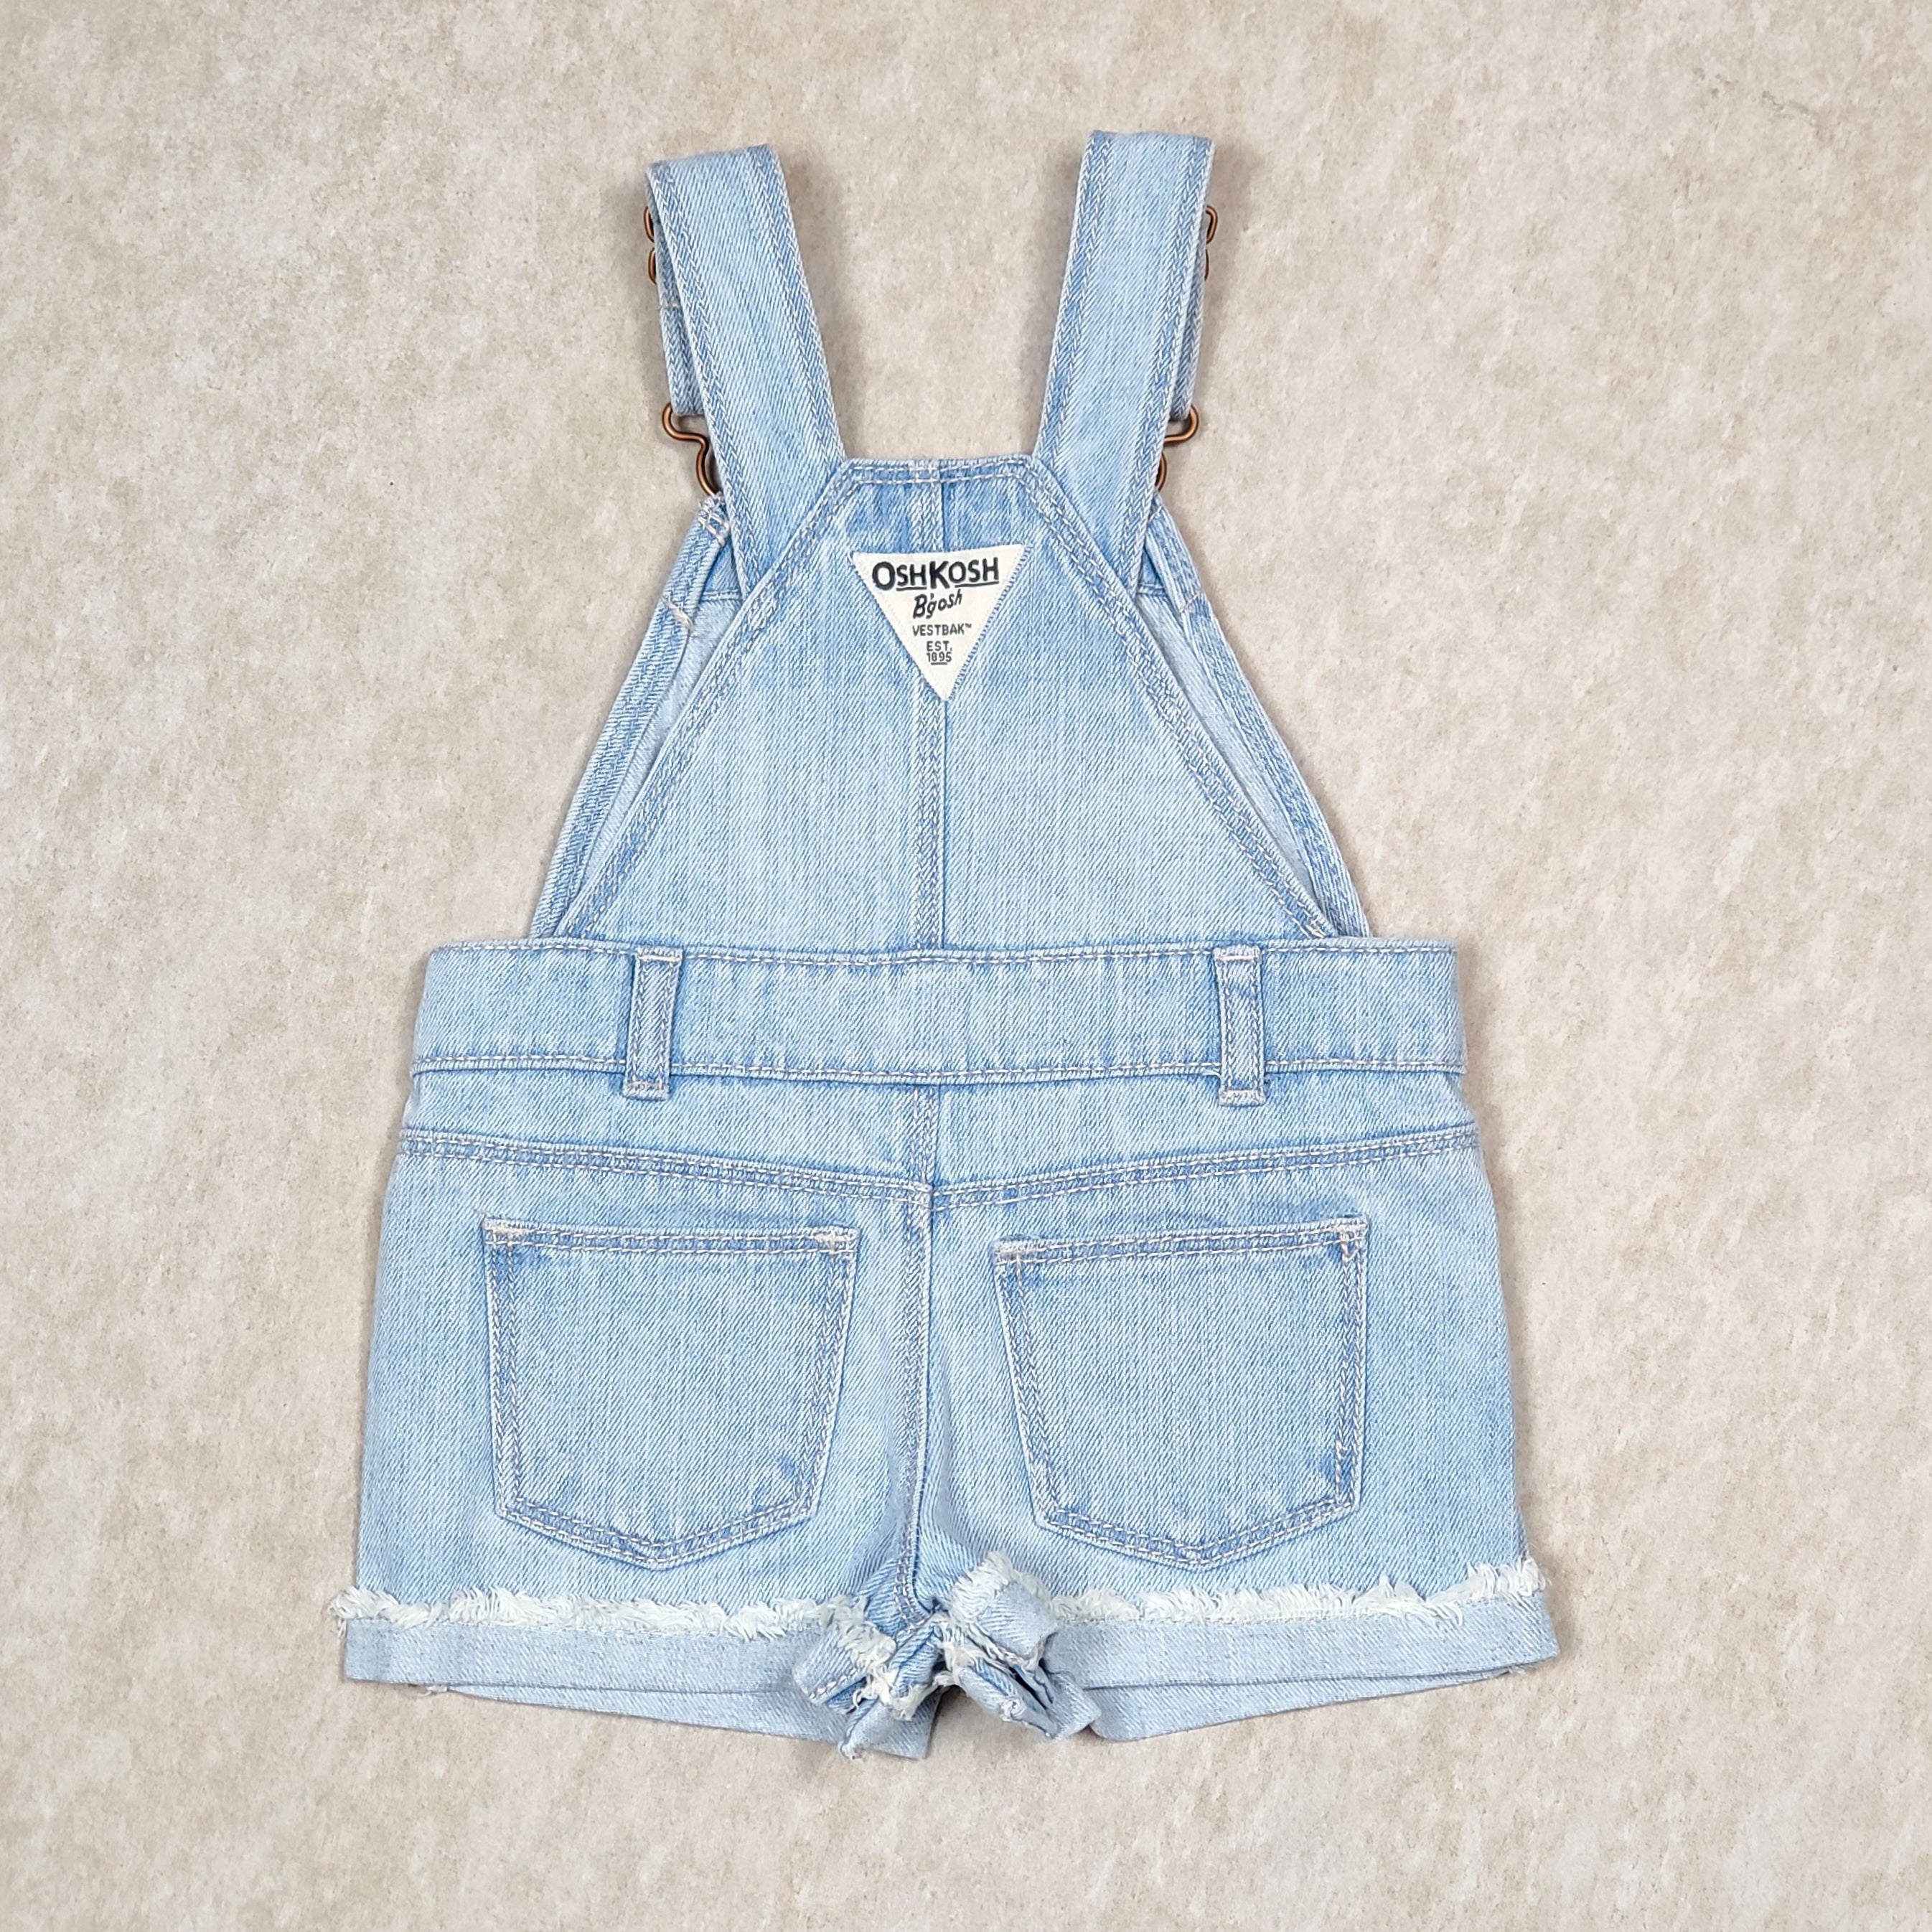 Do We Still Like OVERALLS? | Clothes, Fashion, Style